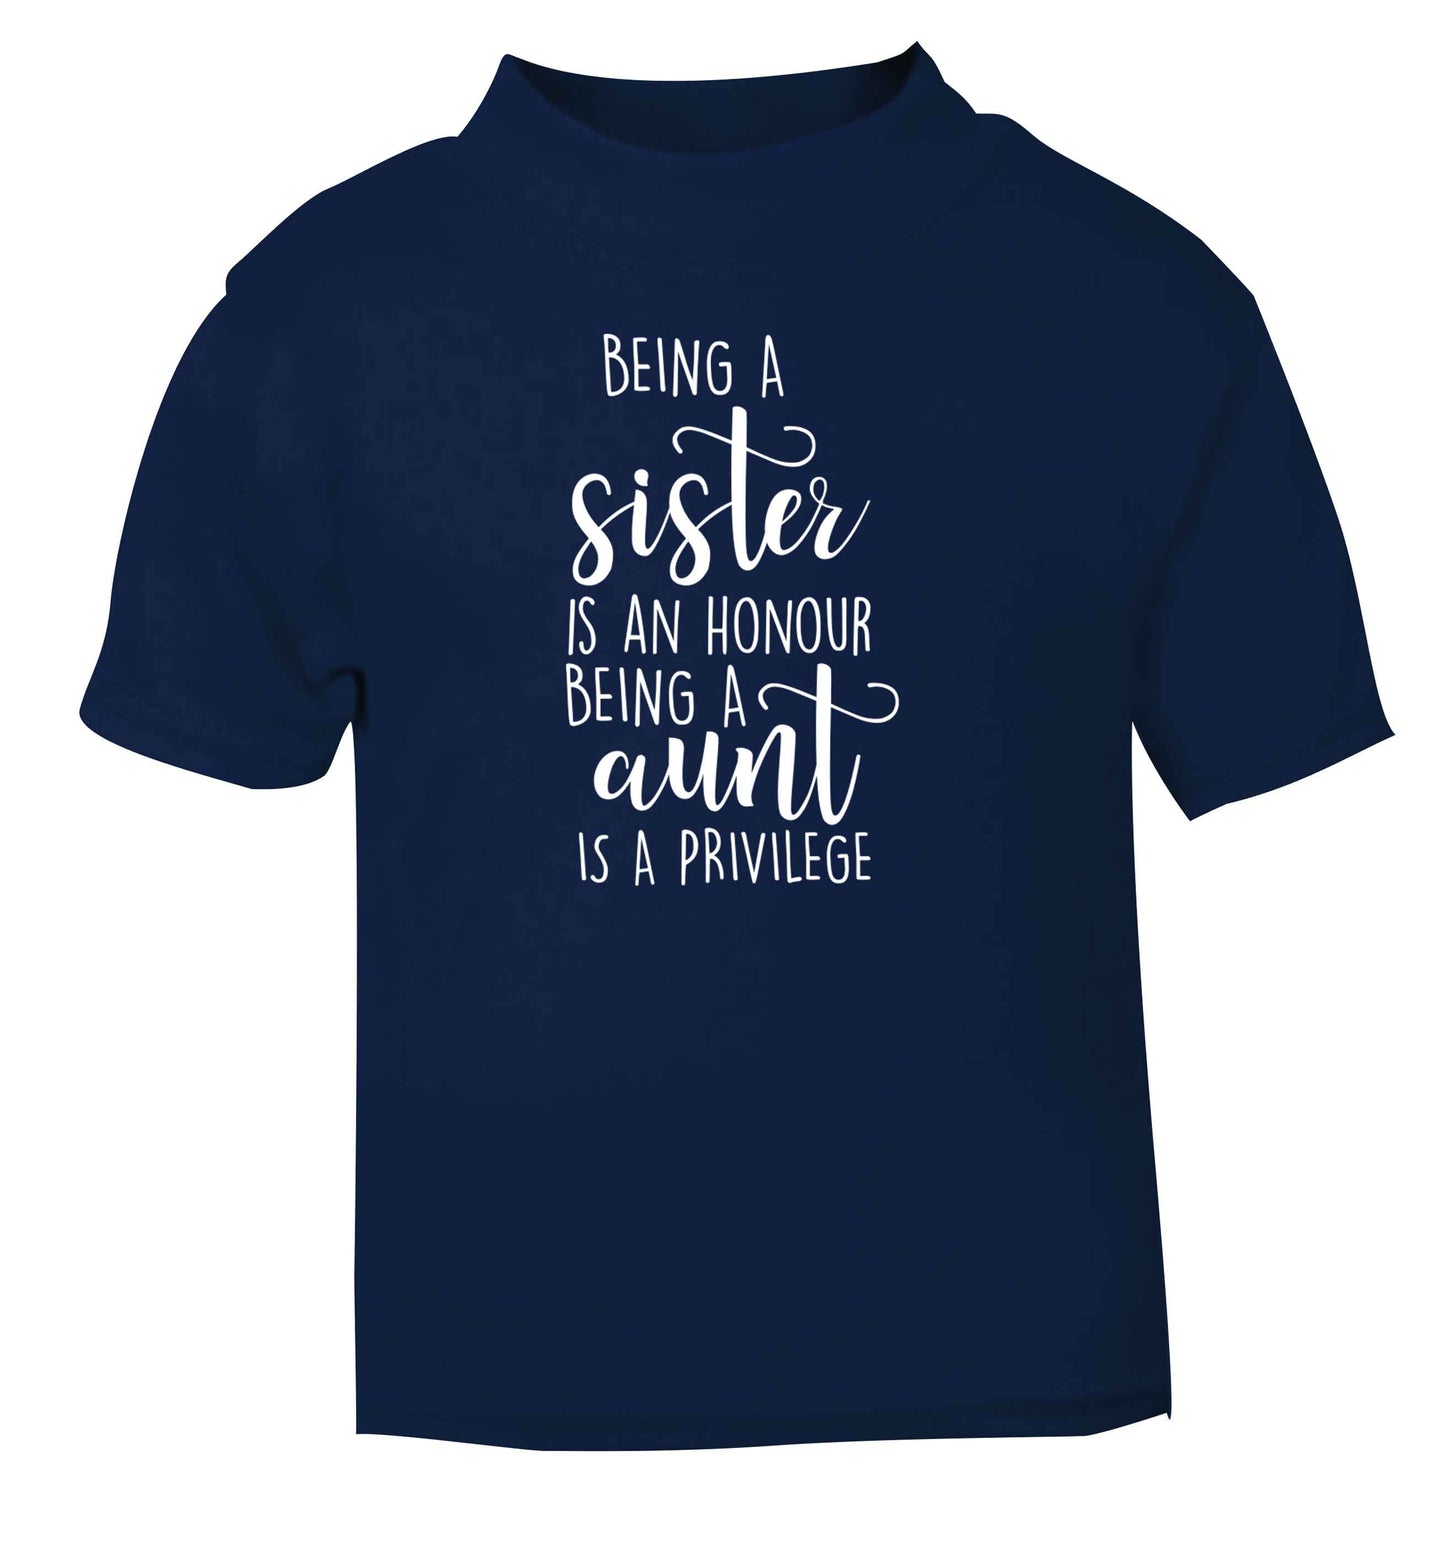 Being a sister is an honour being an auntie is a privilege navy Baby Toddler Tshirt 2 Years